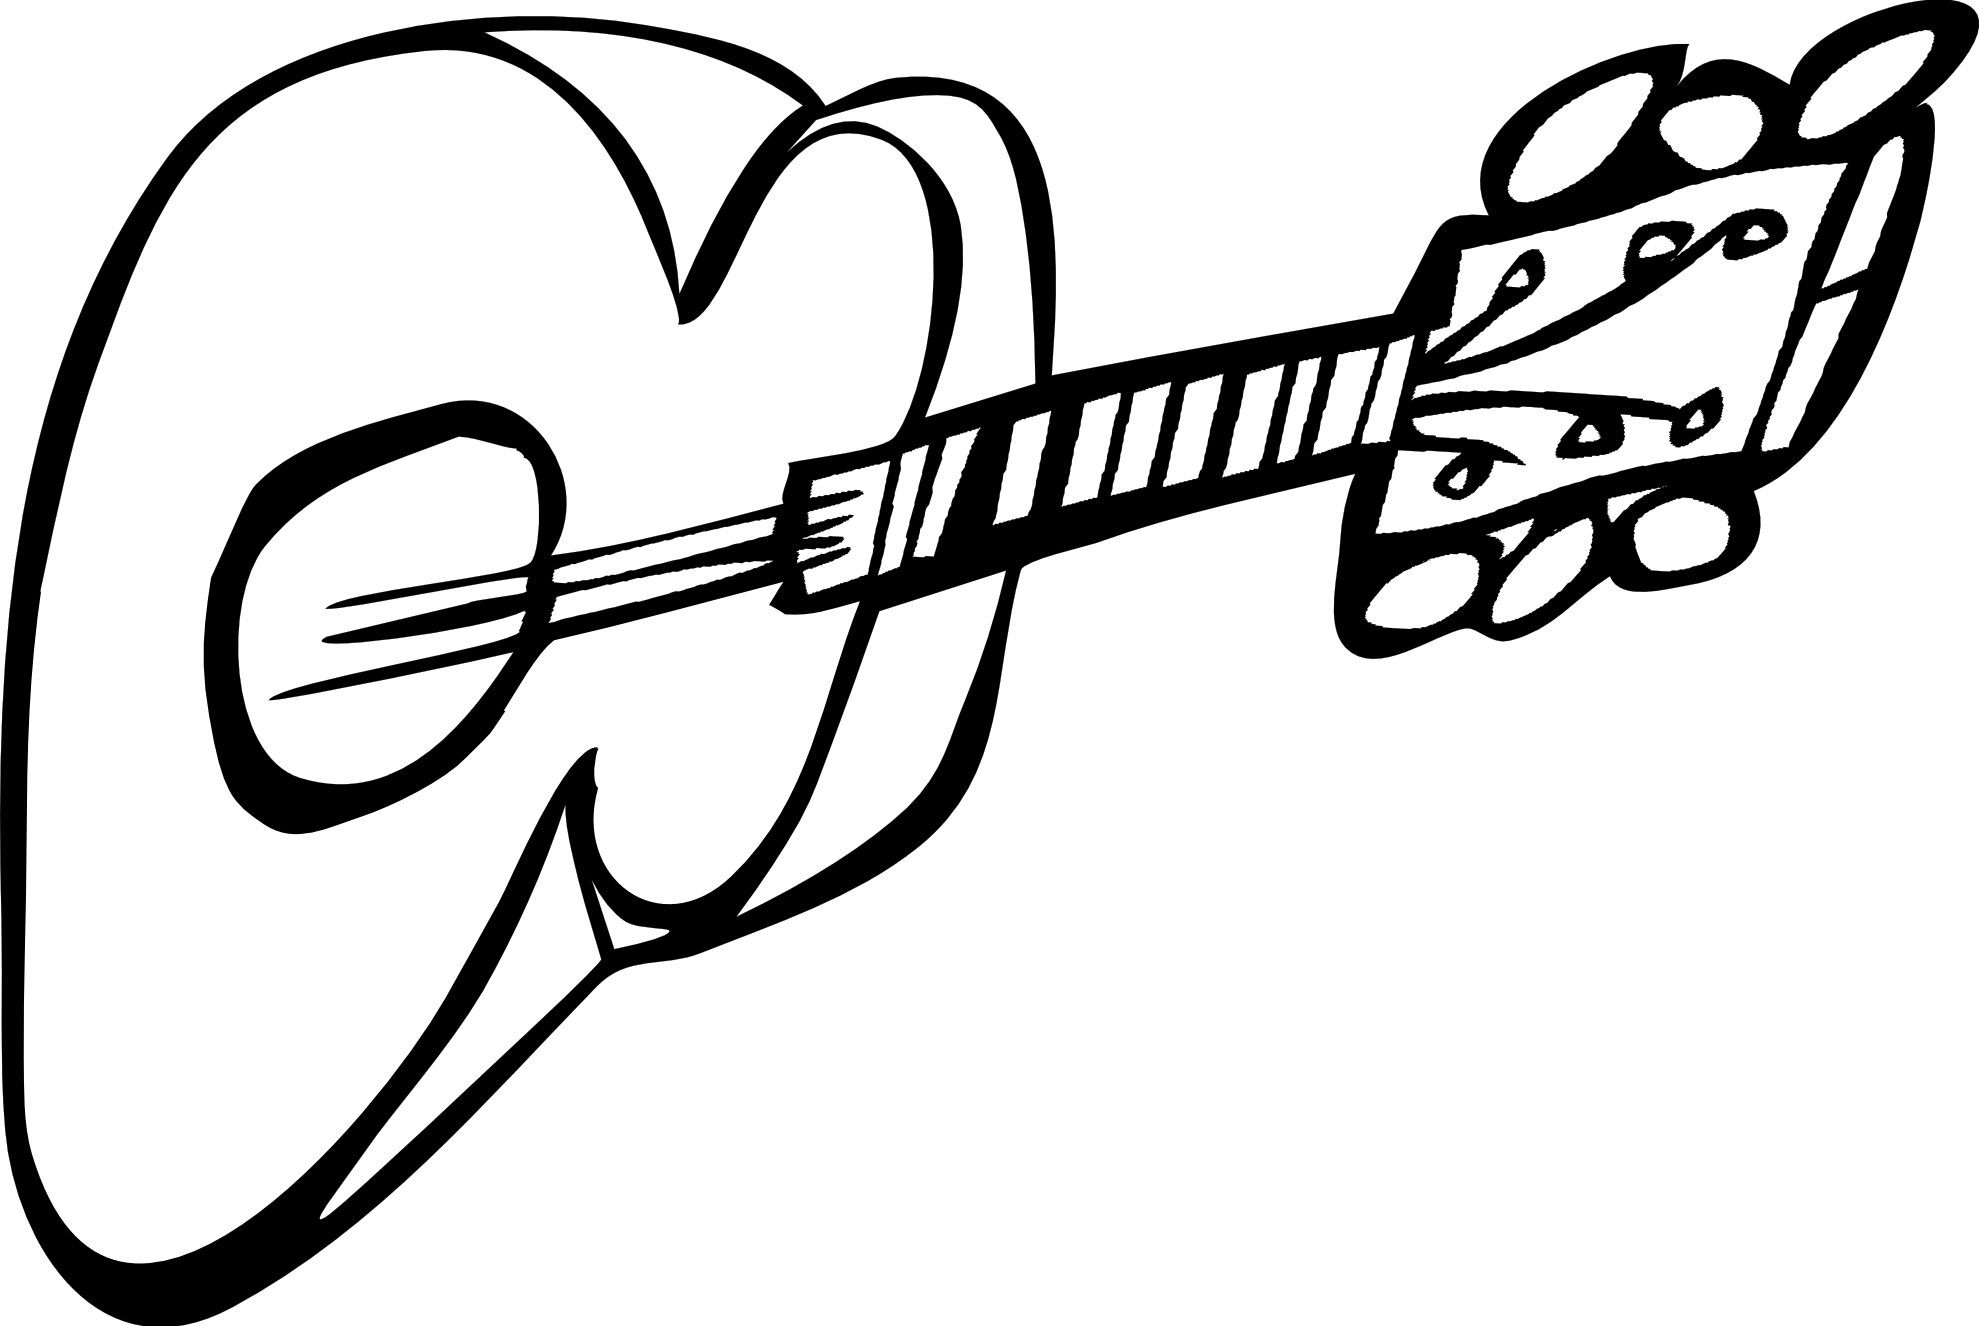 Guitar 1 Black White Line Art Coloring Sheet Colouring Page ...